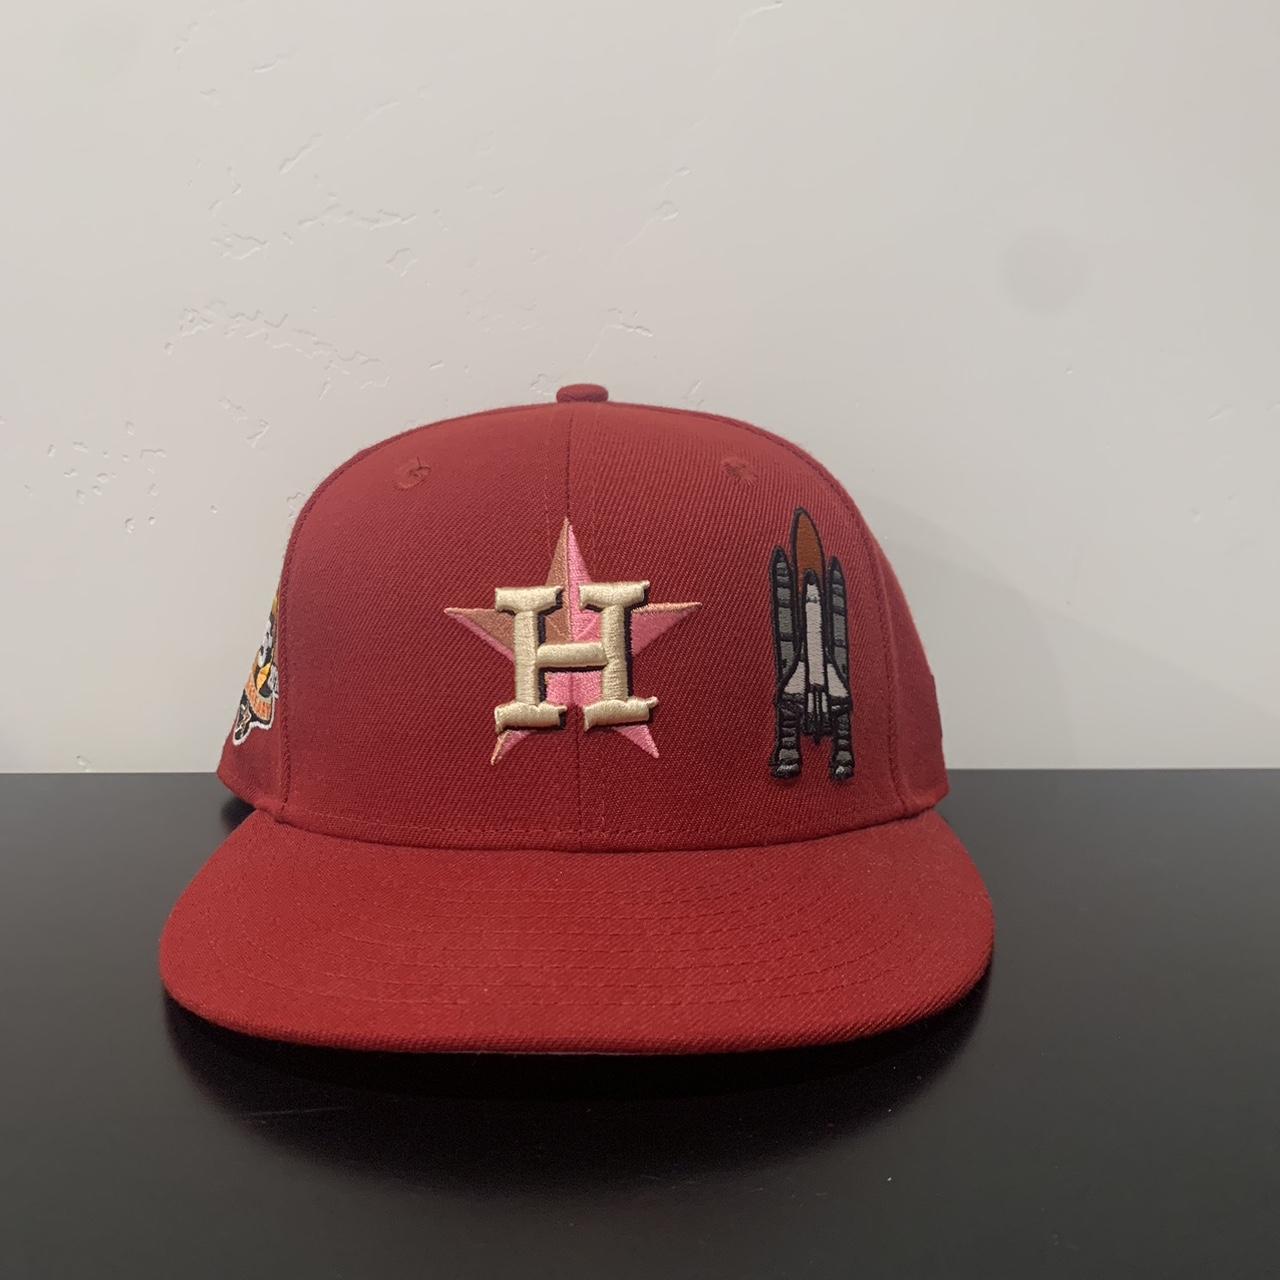 Houston Astros “Crayola Pack” Fitted Hat Size 7 1/8 - Depop